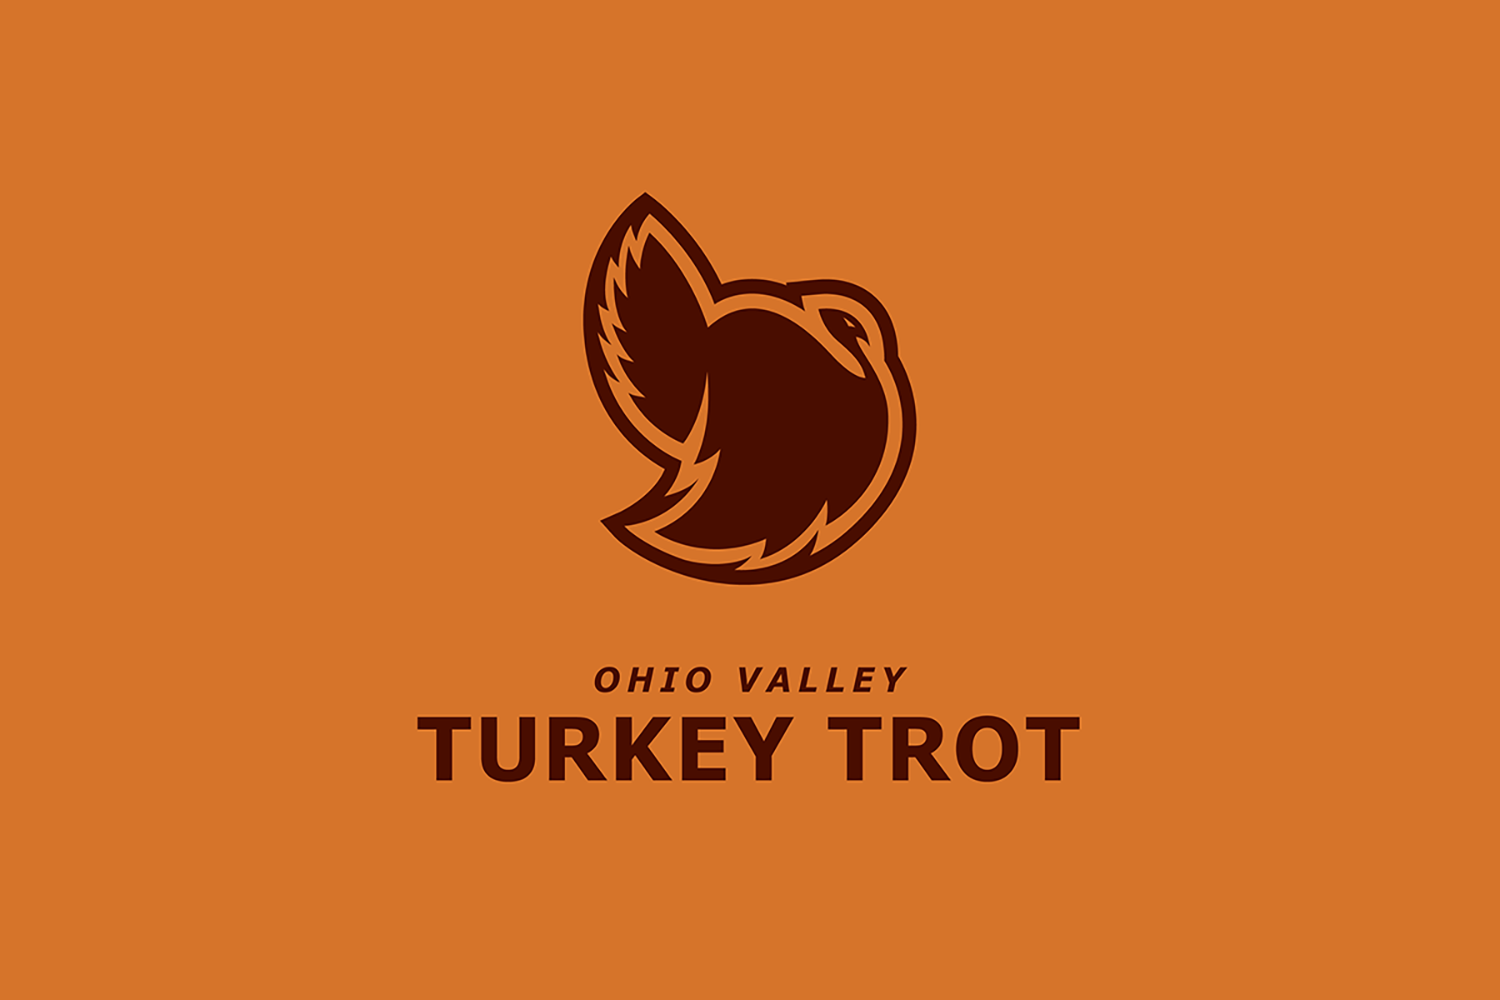 The official logo of the Ohio Valley Turkey Trot East Liverpool, Ohio